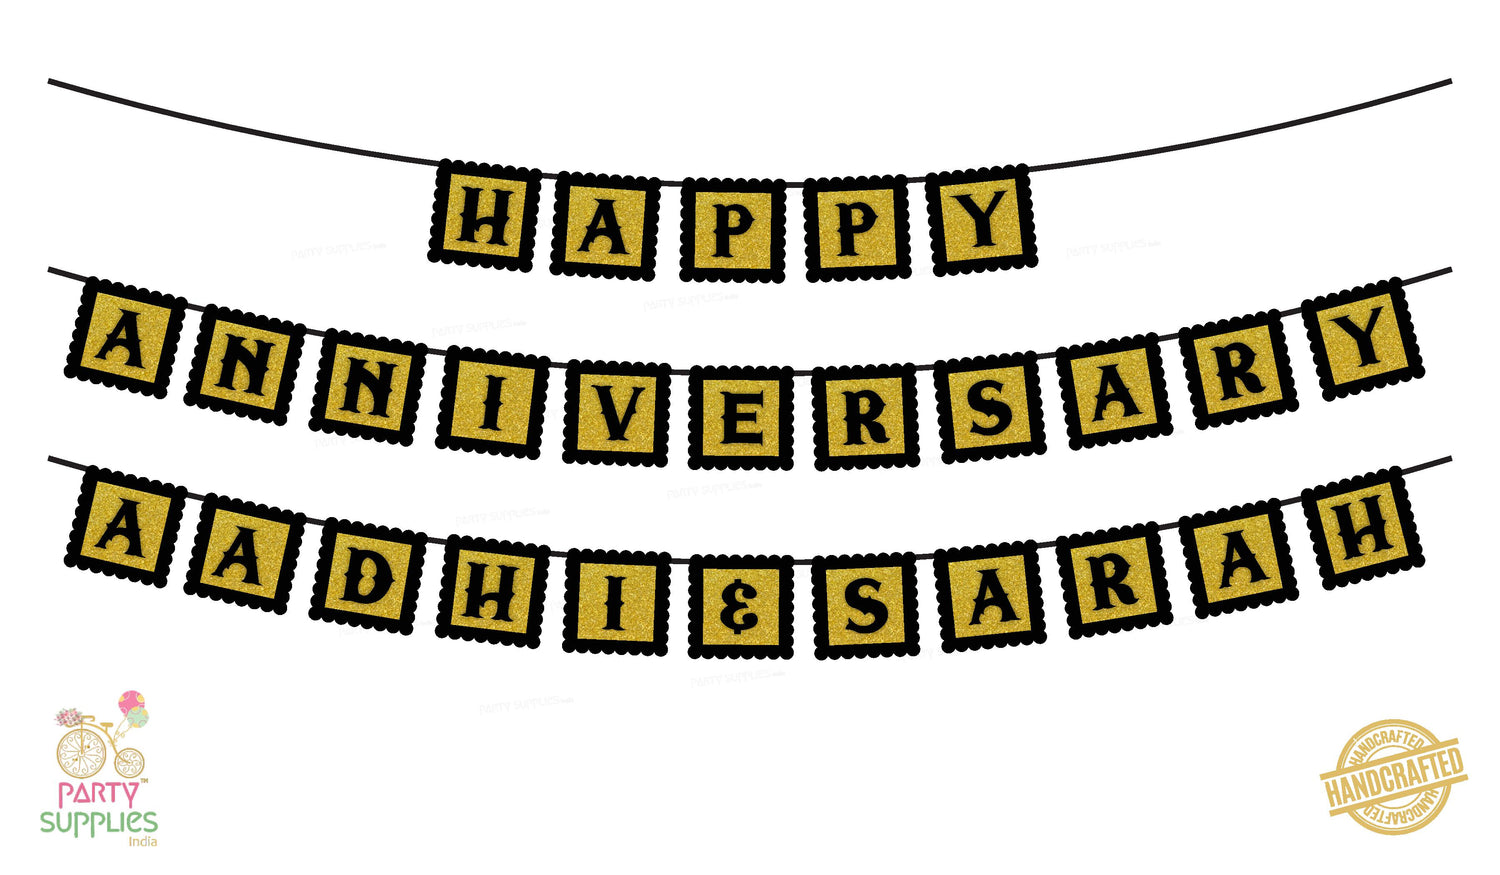 Hand Crafted Gold with Black Happy Anniversary Bunting